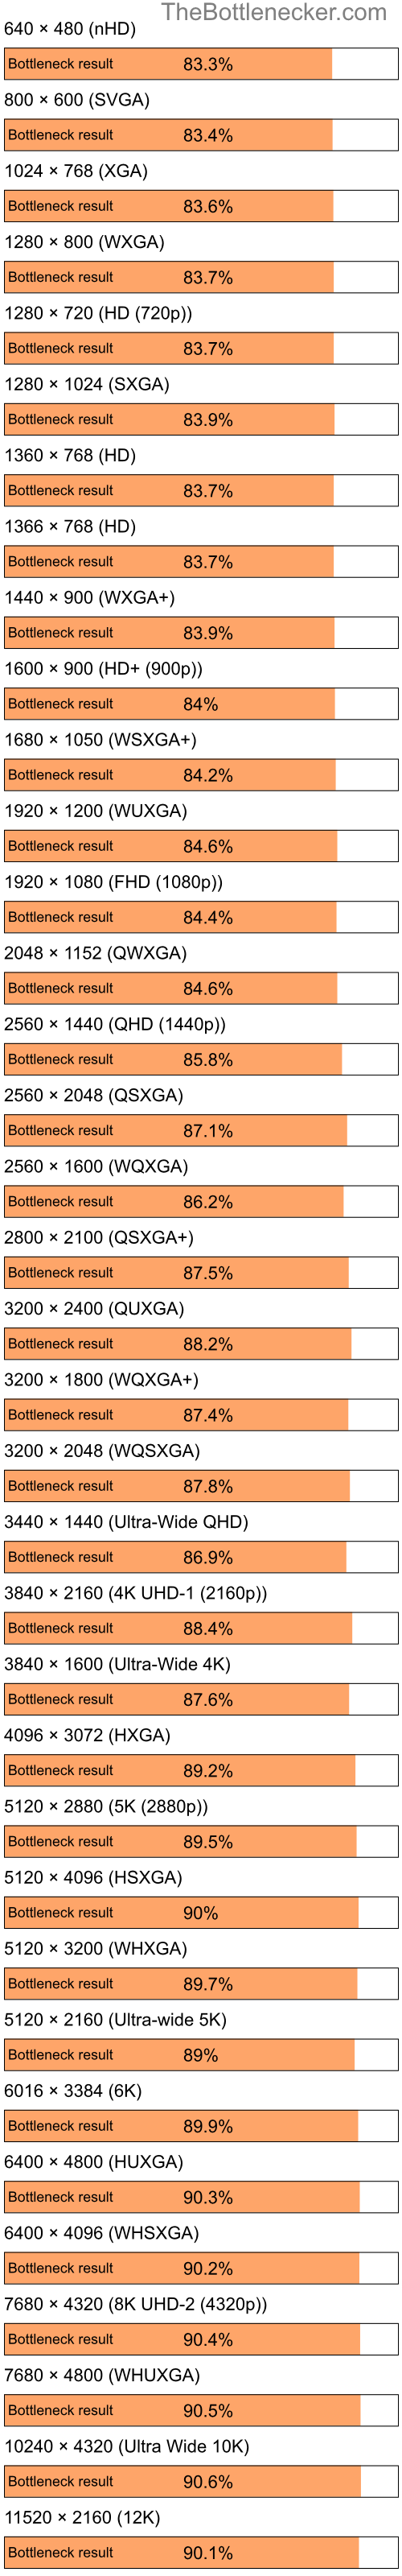 Bottleneck results by resolution for Intel Celeron M 420 and AMD Radeon 9600 PRO Family in Graphic Card Intense Tasks